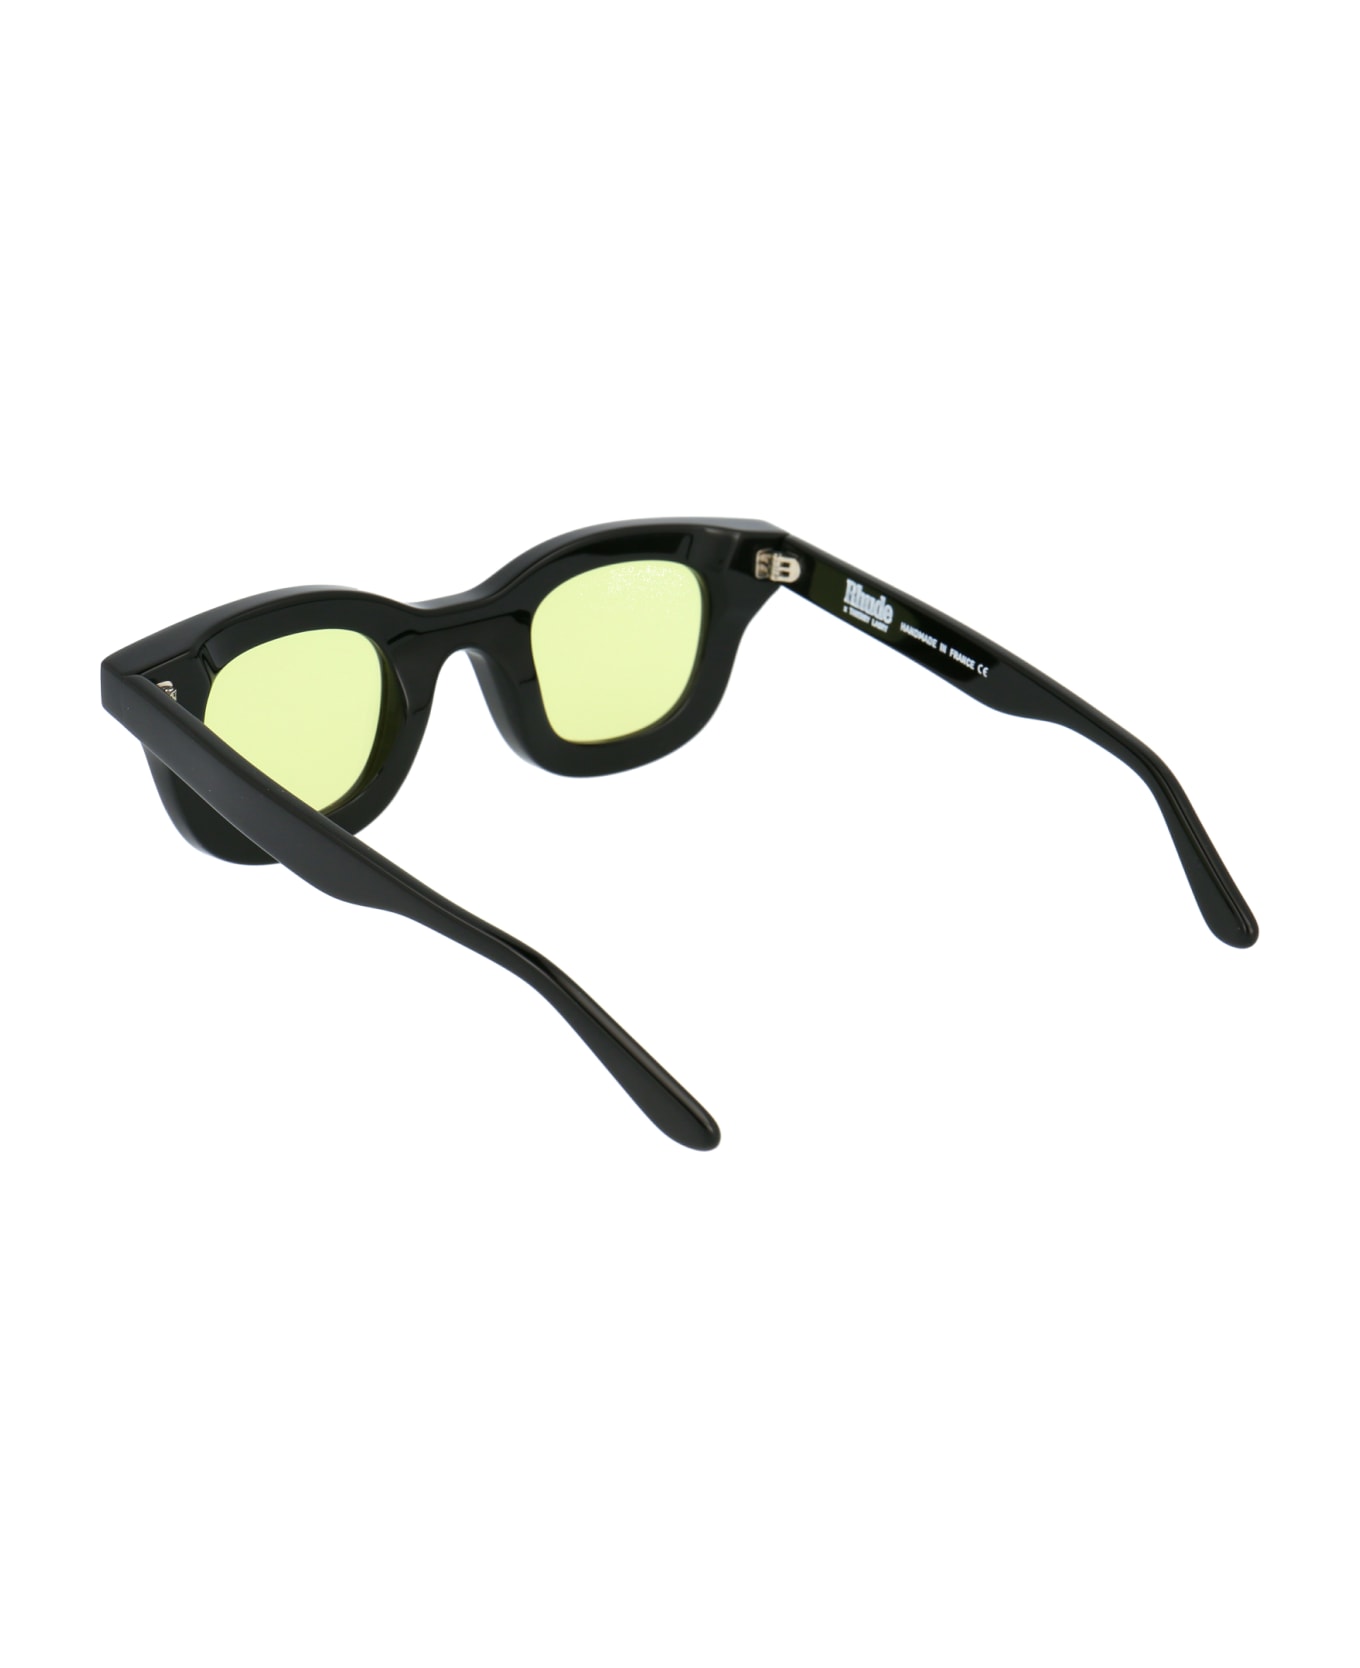 Thierry Lasry Rhude X Thierry Lasry Sunglasses - 101 BLACK/YELLOW